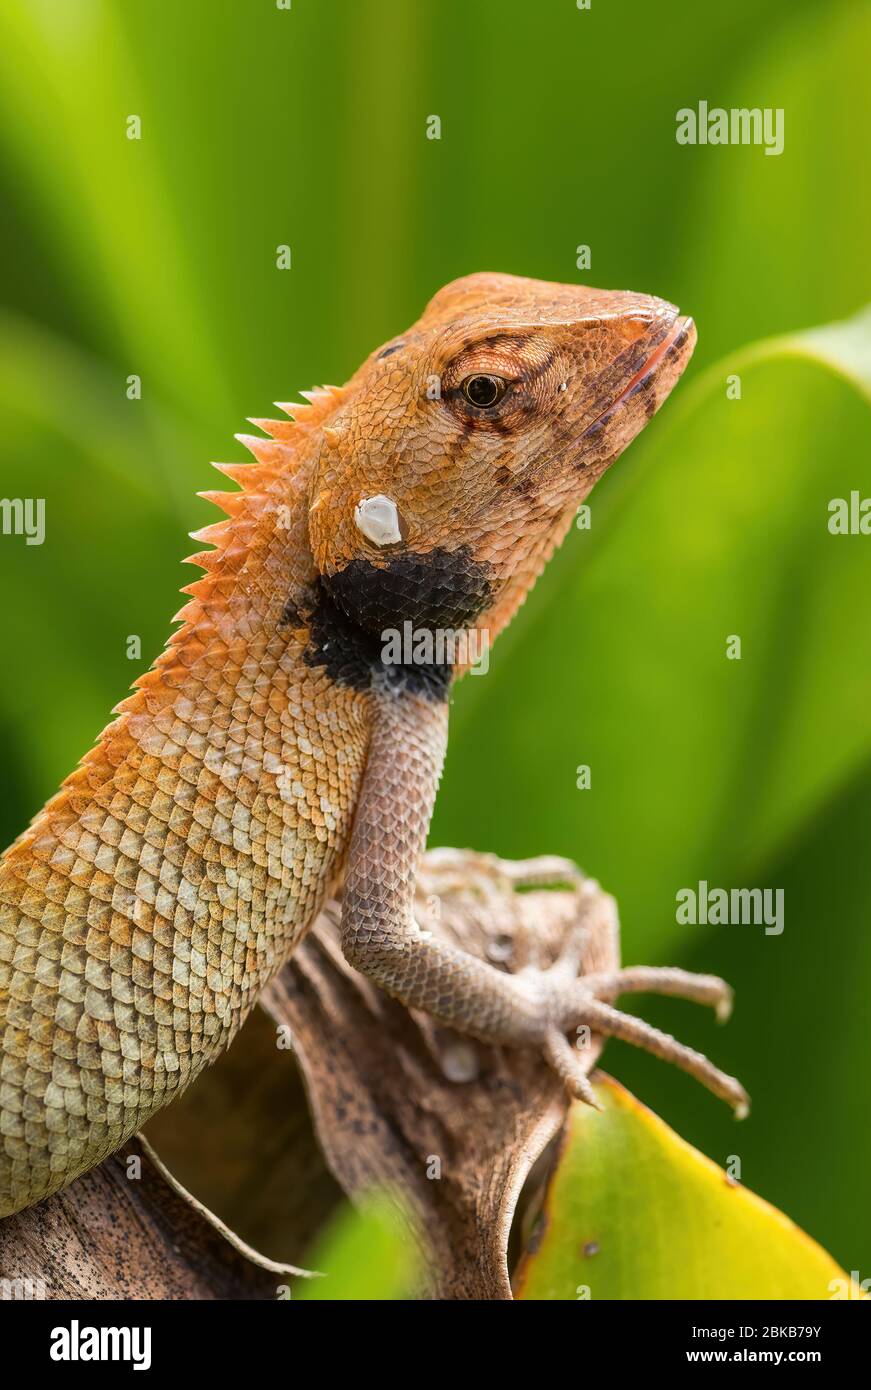 Oriental Garden Lizard - Calotes versicolor, colorful changeable lizard from Asian forests and bushes, Pangkor Island, Malaysia. Stock Photo